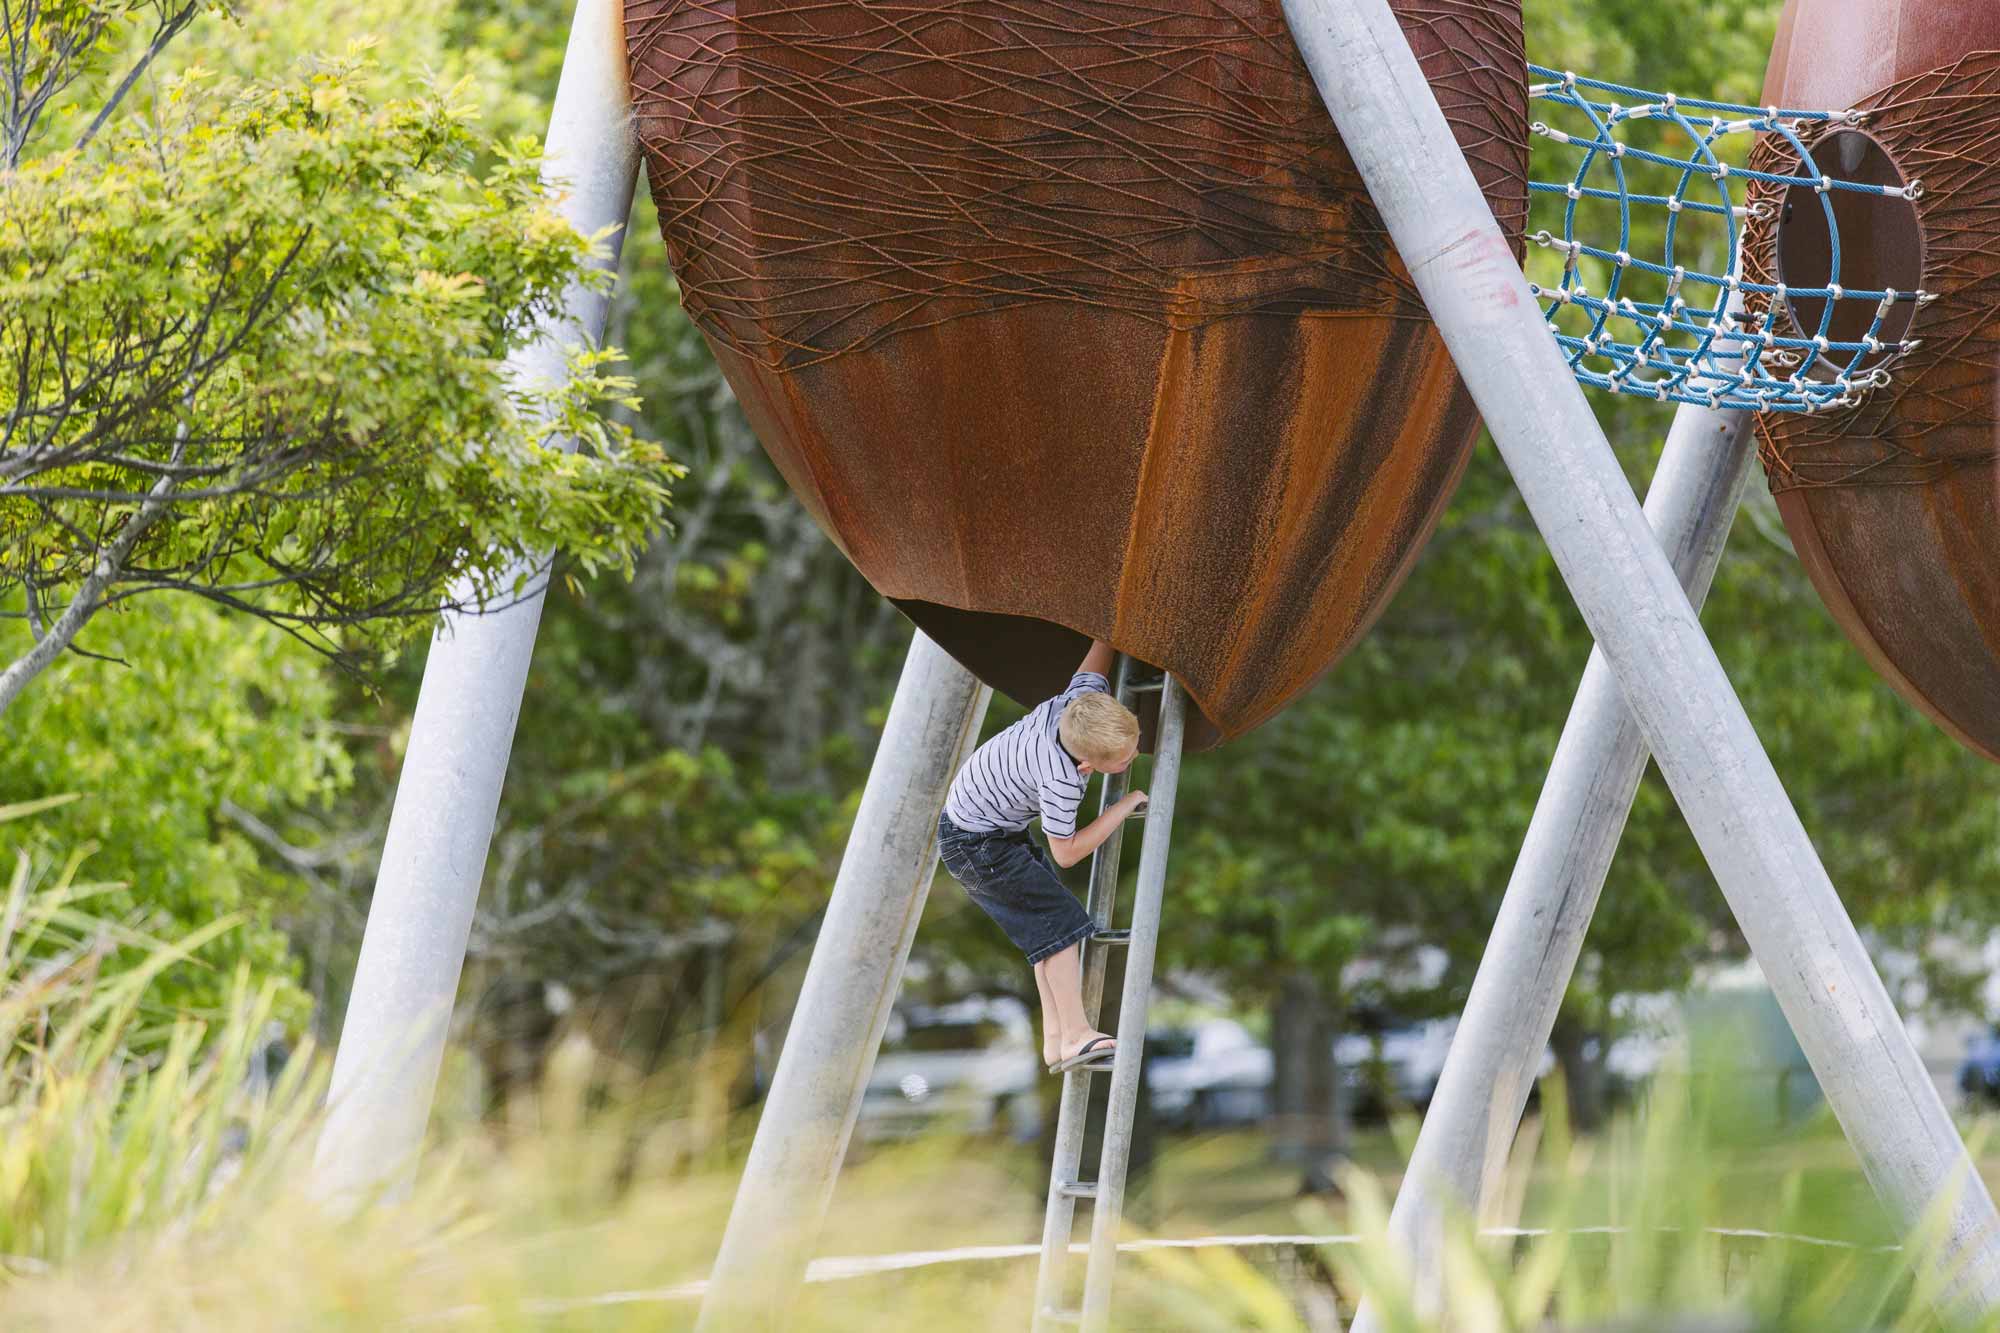 Hobsonville Point Playground